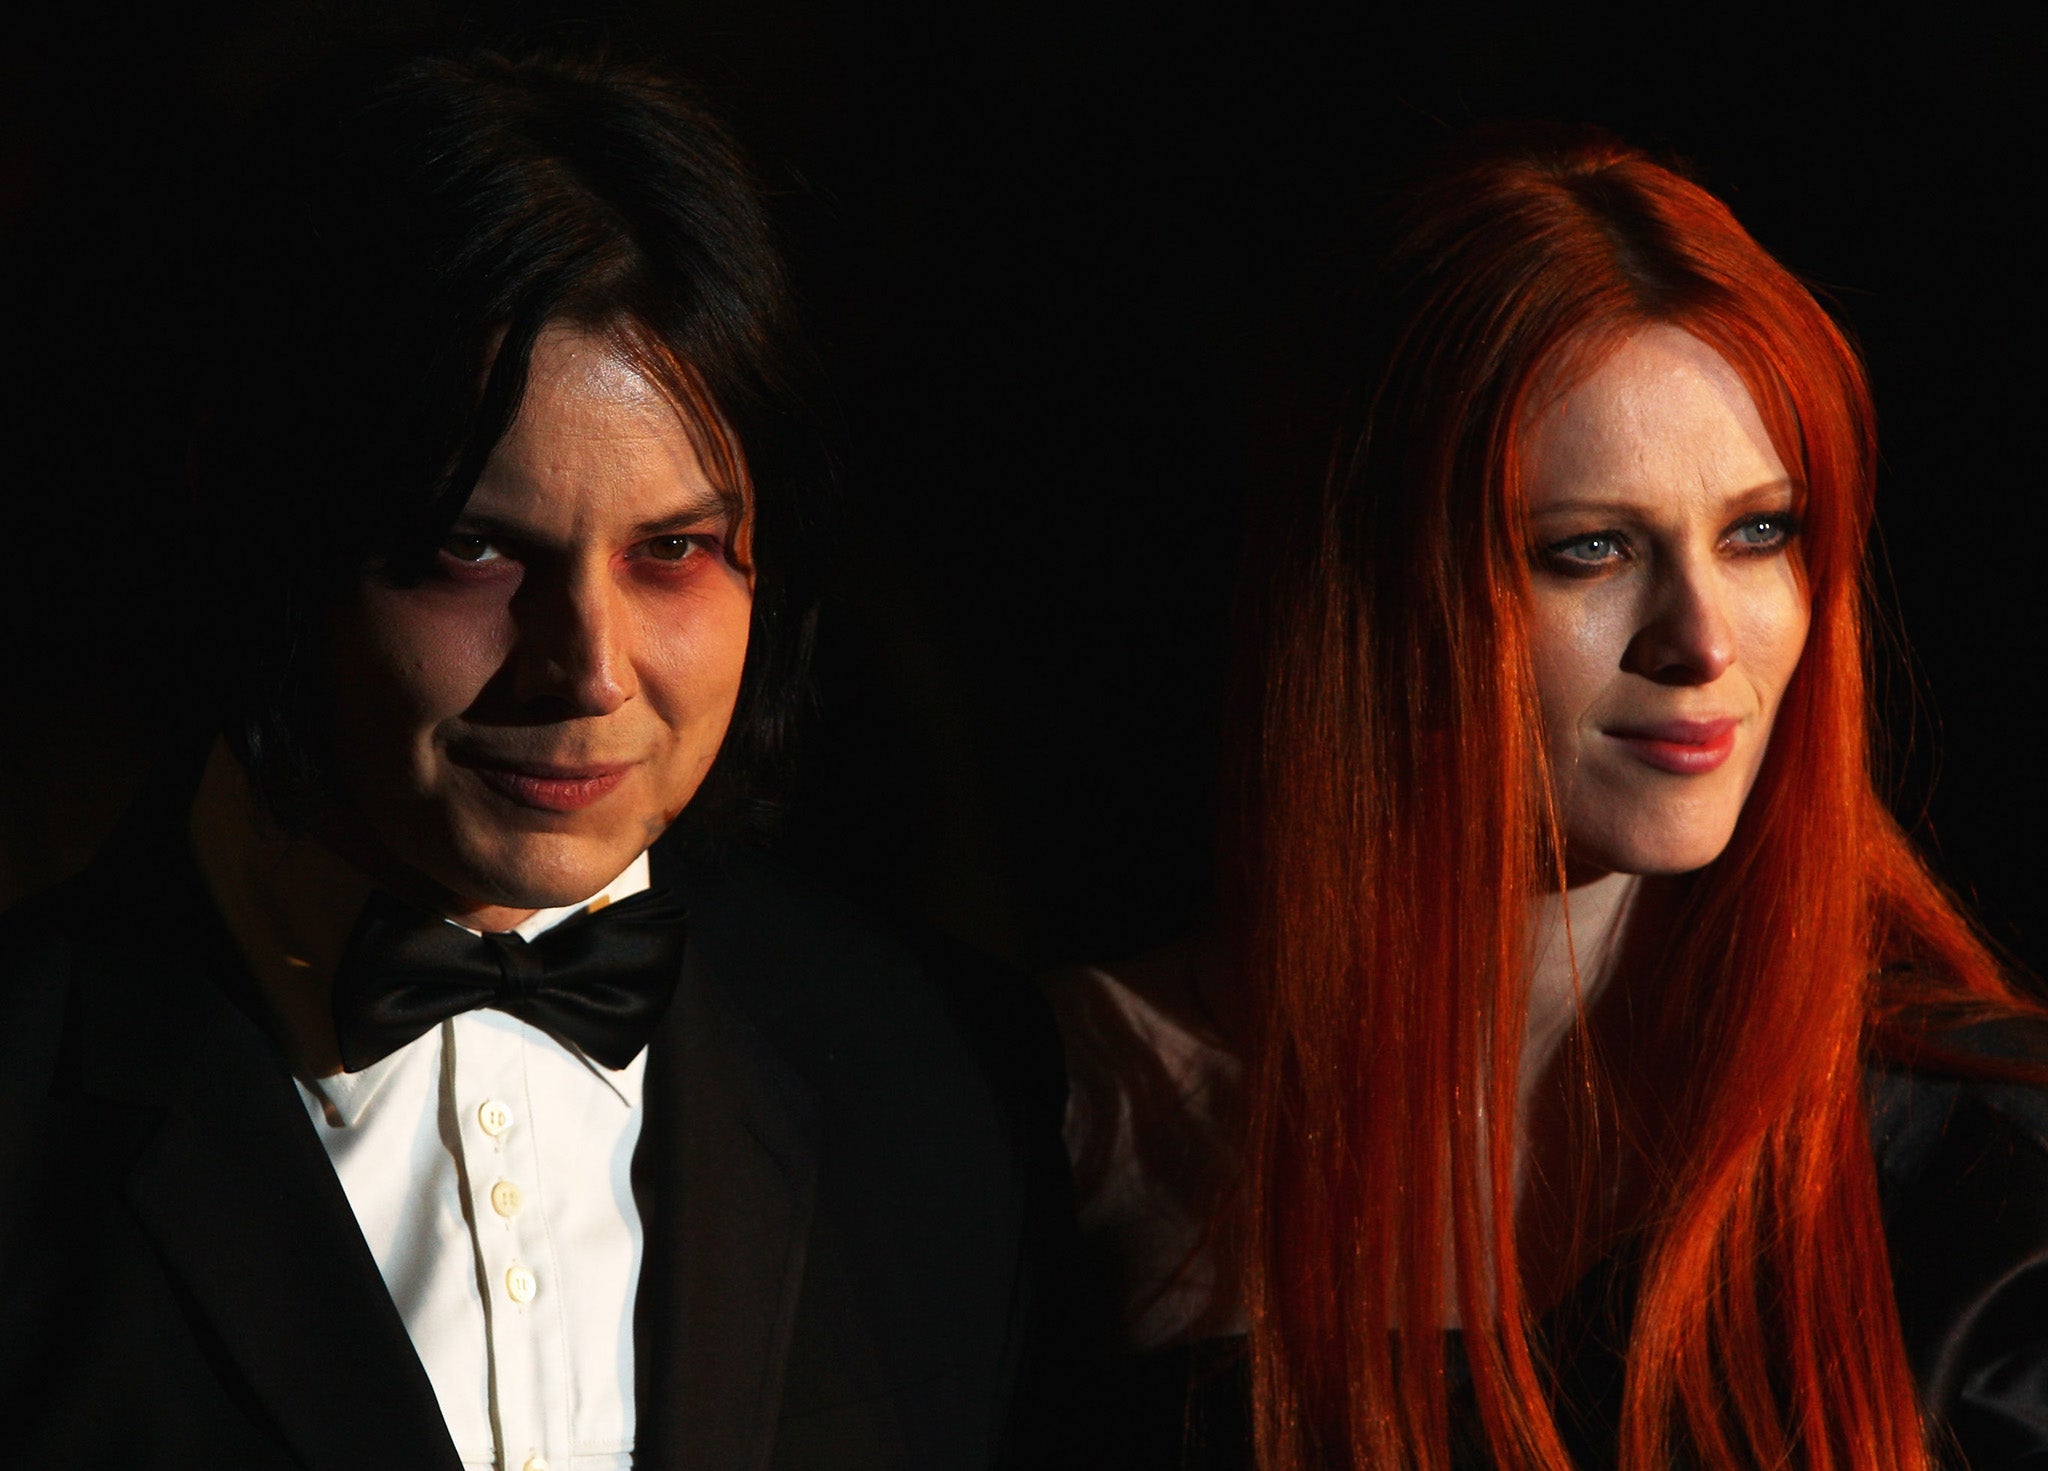 Jack White and Karen Elson pictured together at the Quantum of Solace premiere in 2008.